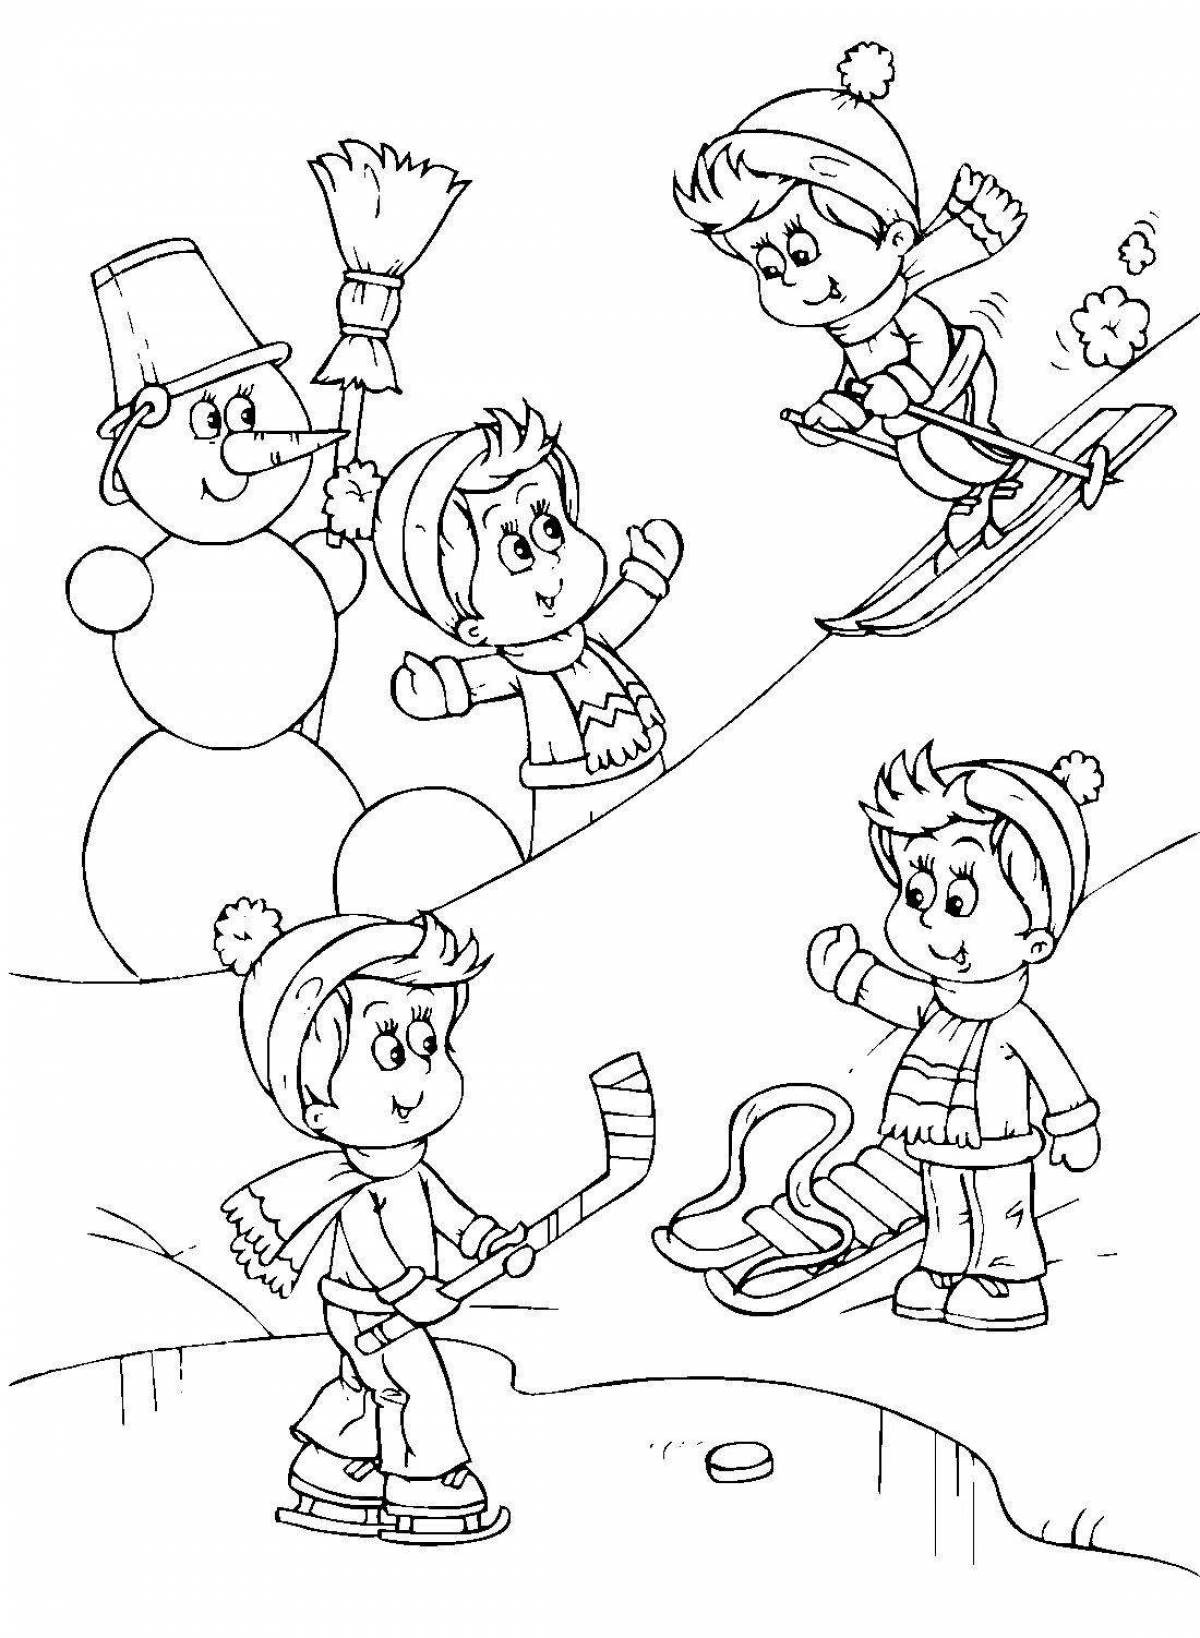 Awesome winter games coloring pages